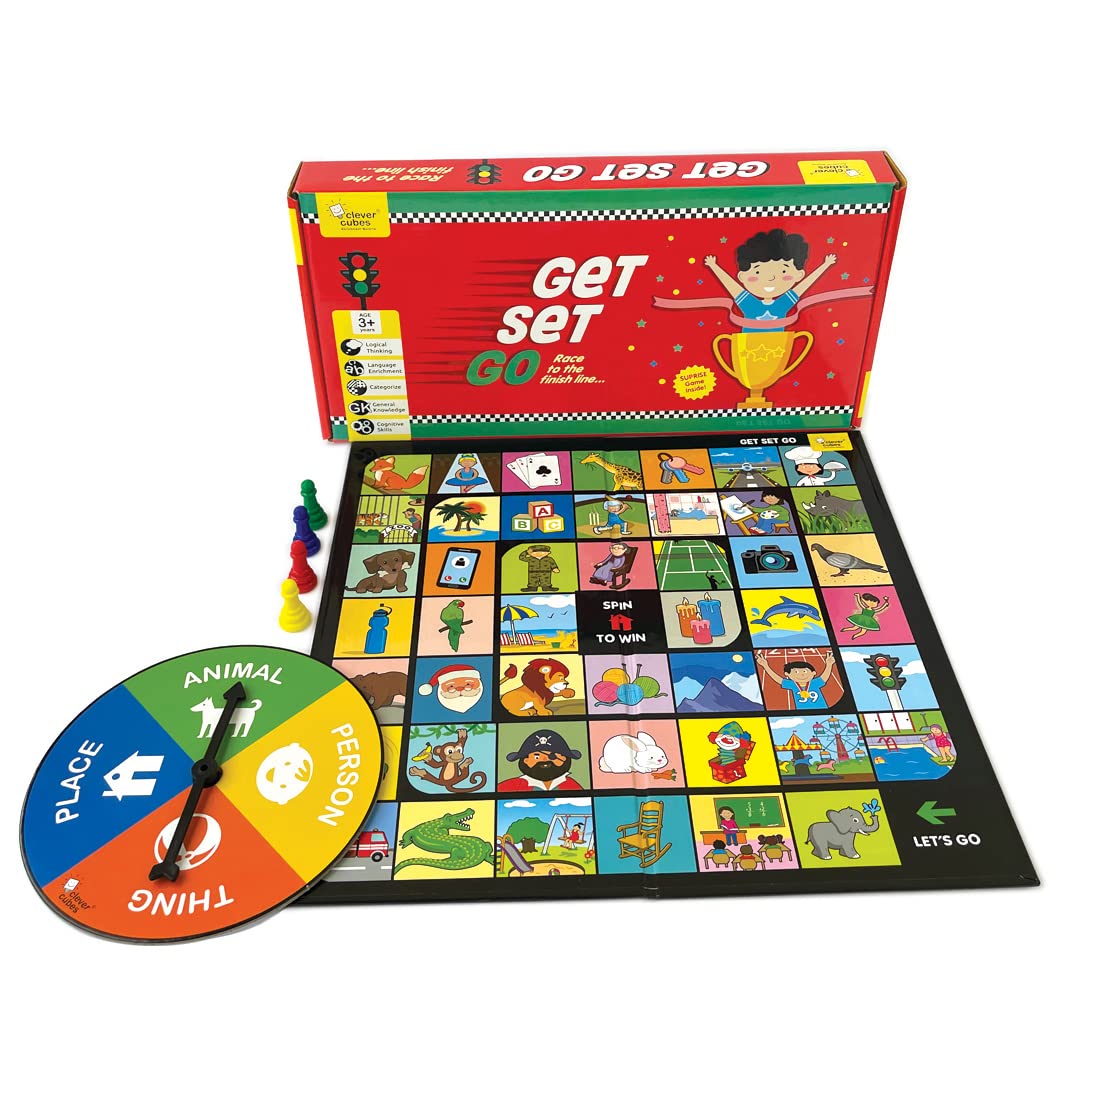 Get Set Go Game. A Fun categorising Game. Educational Games: Activity Games.